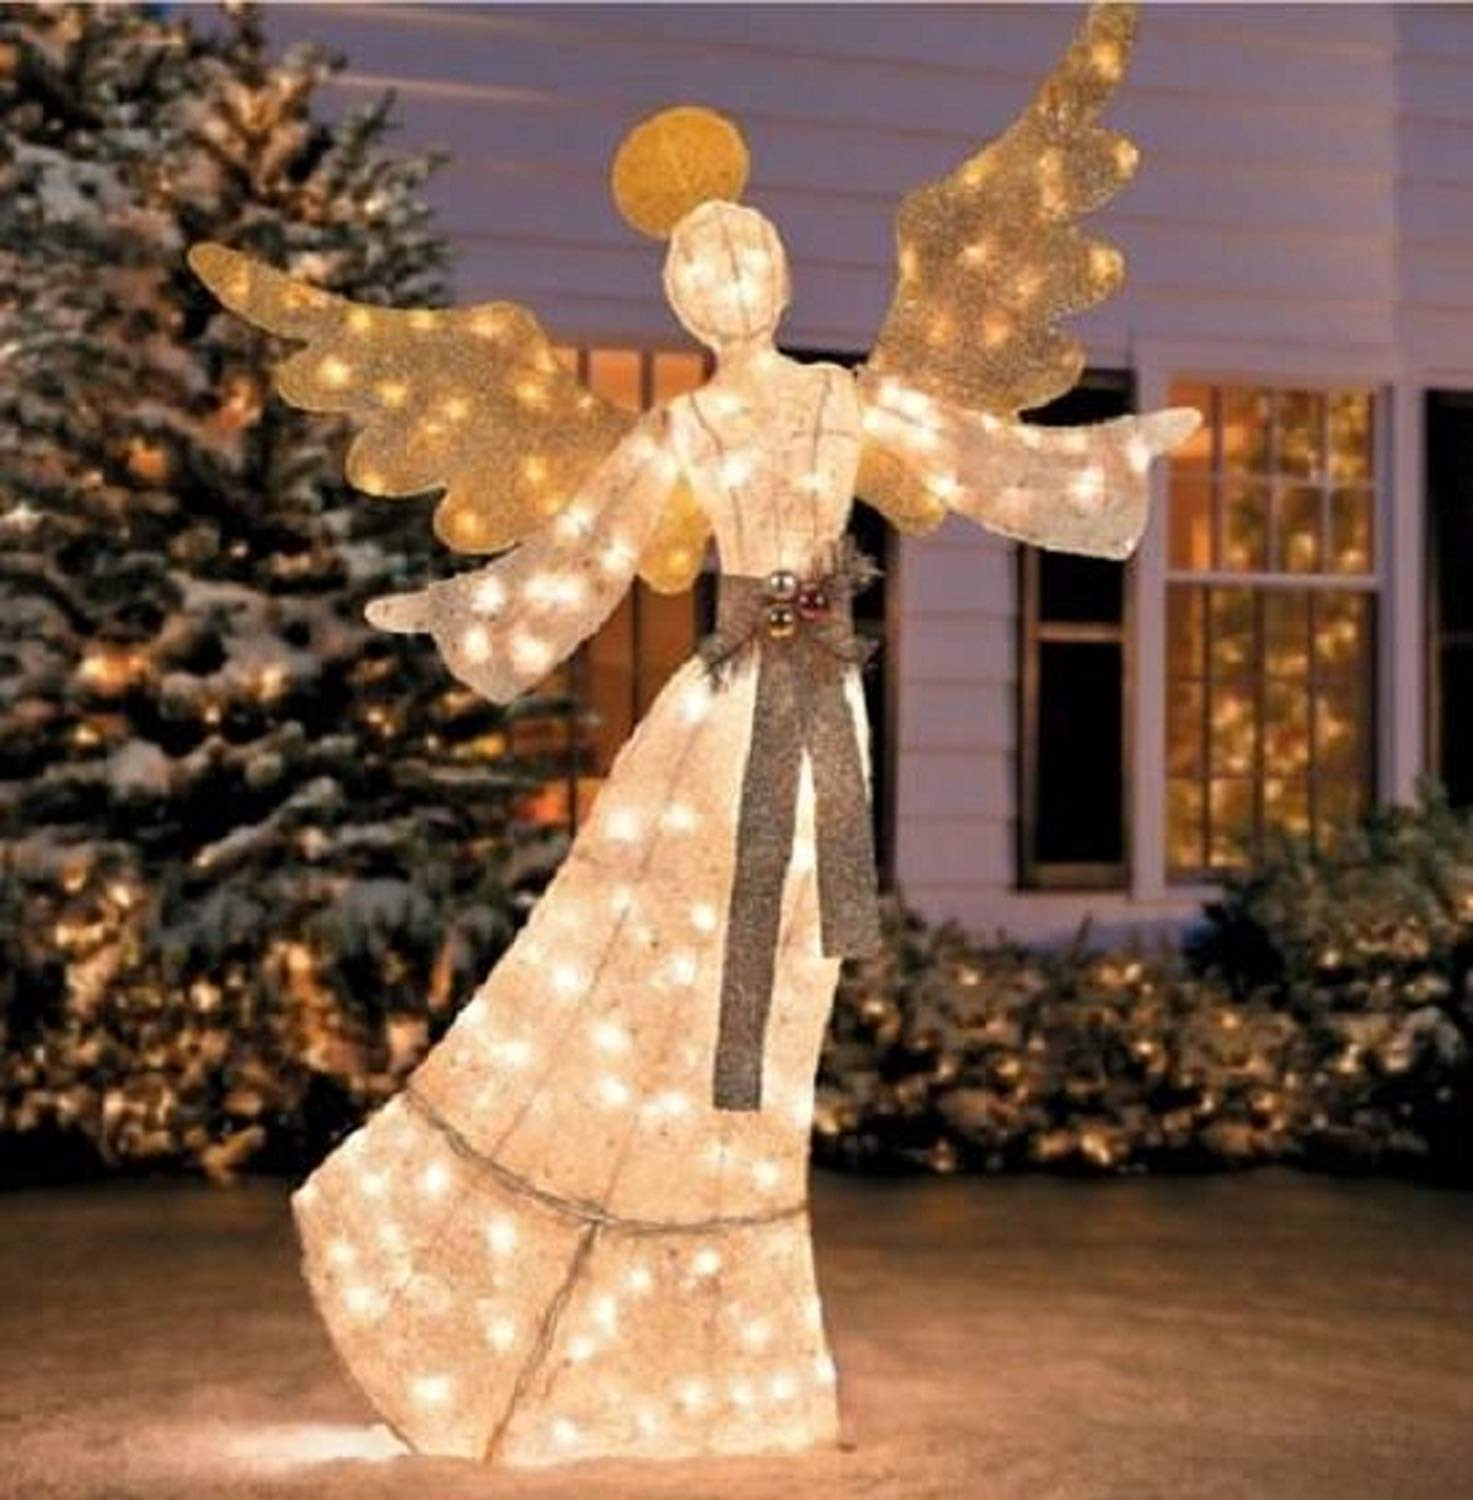 Outdoor Christmas Angels
 Angels Lighted Yard Displays